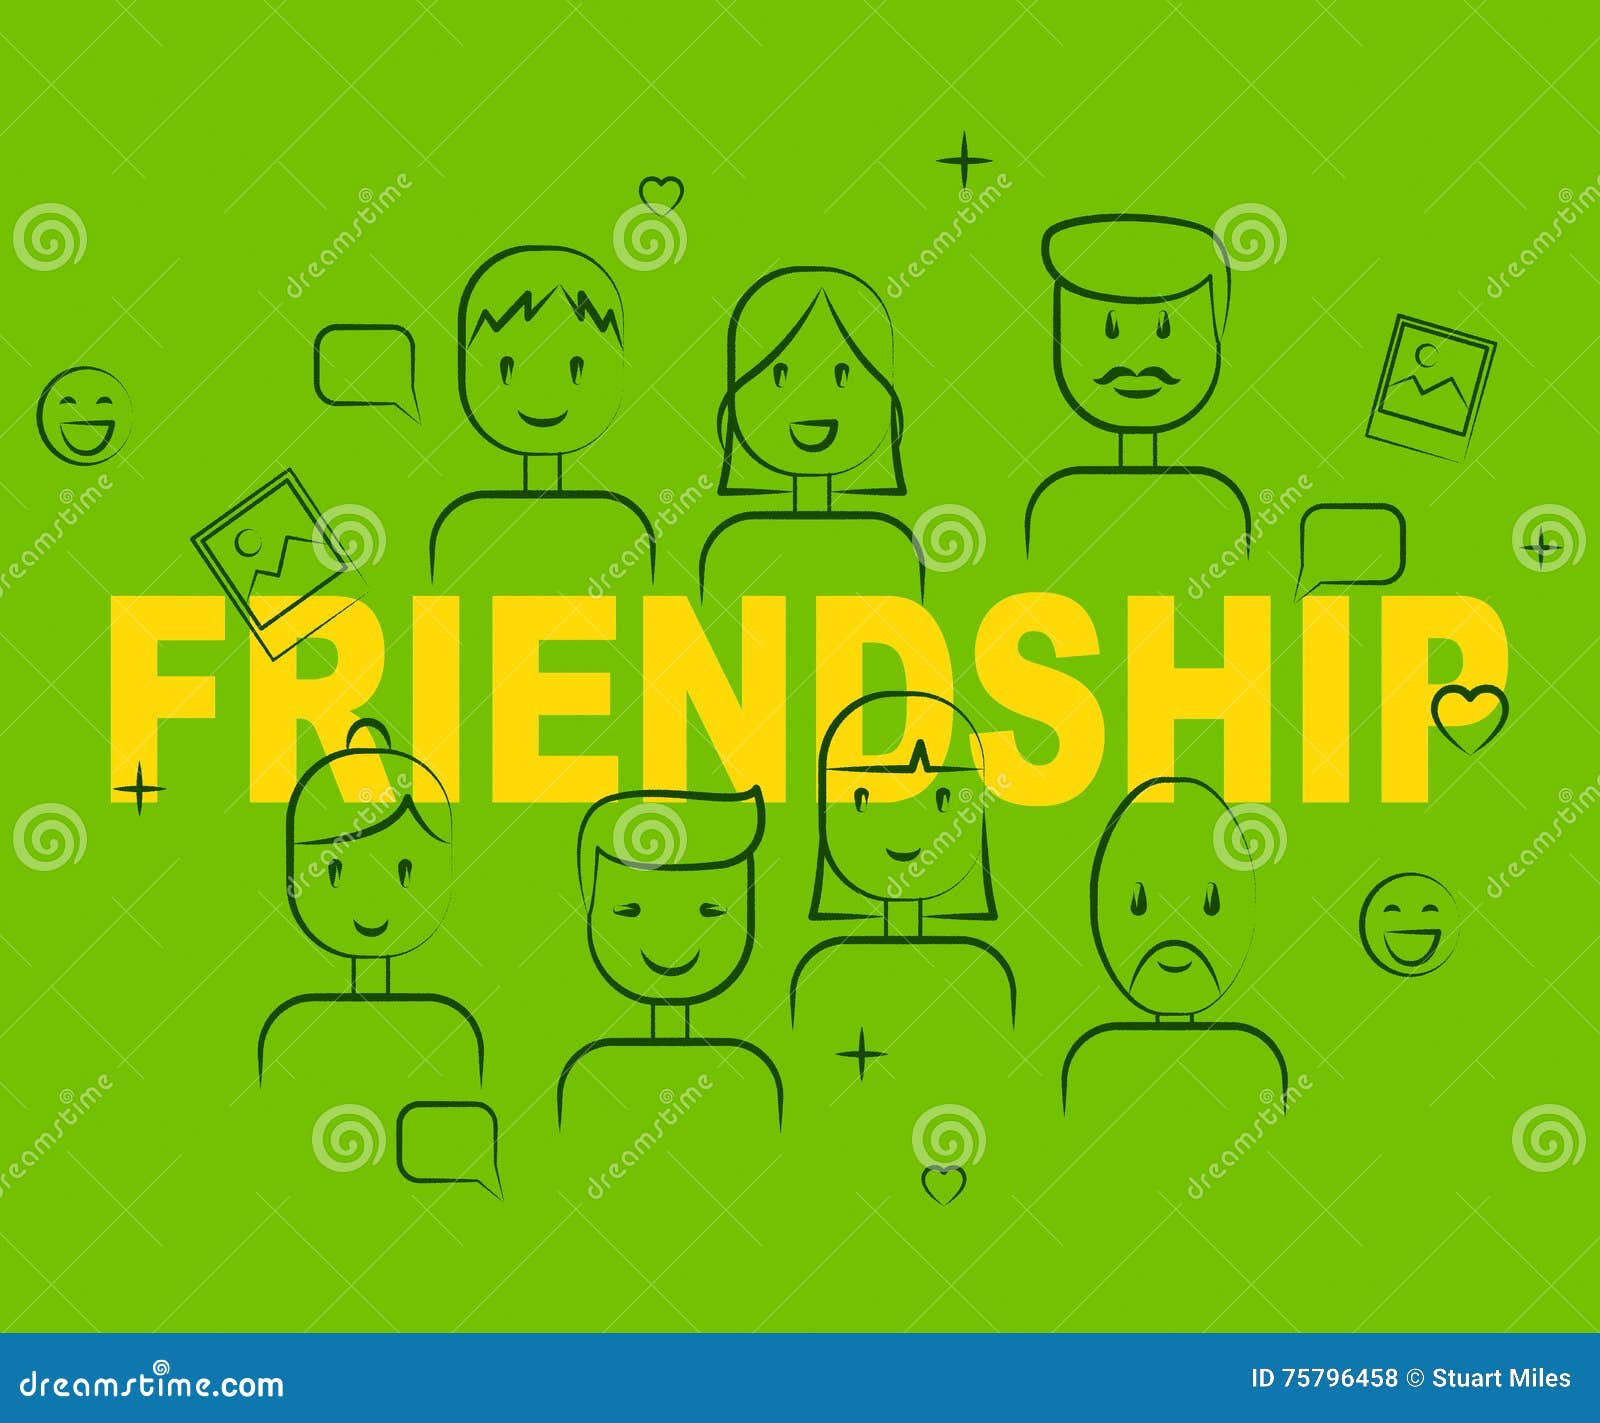 friendship people indicates buddy friendships and network